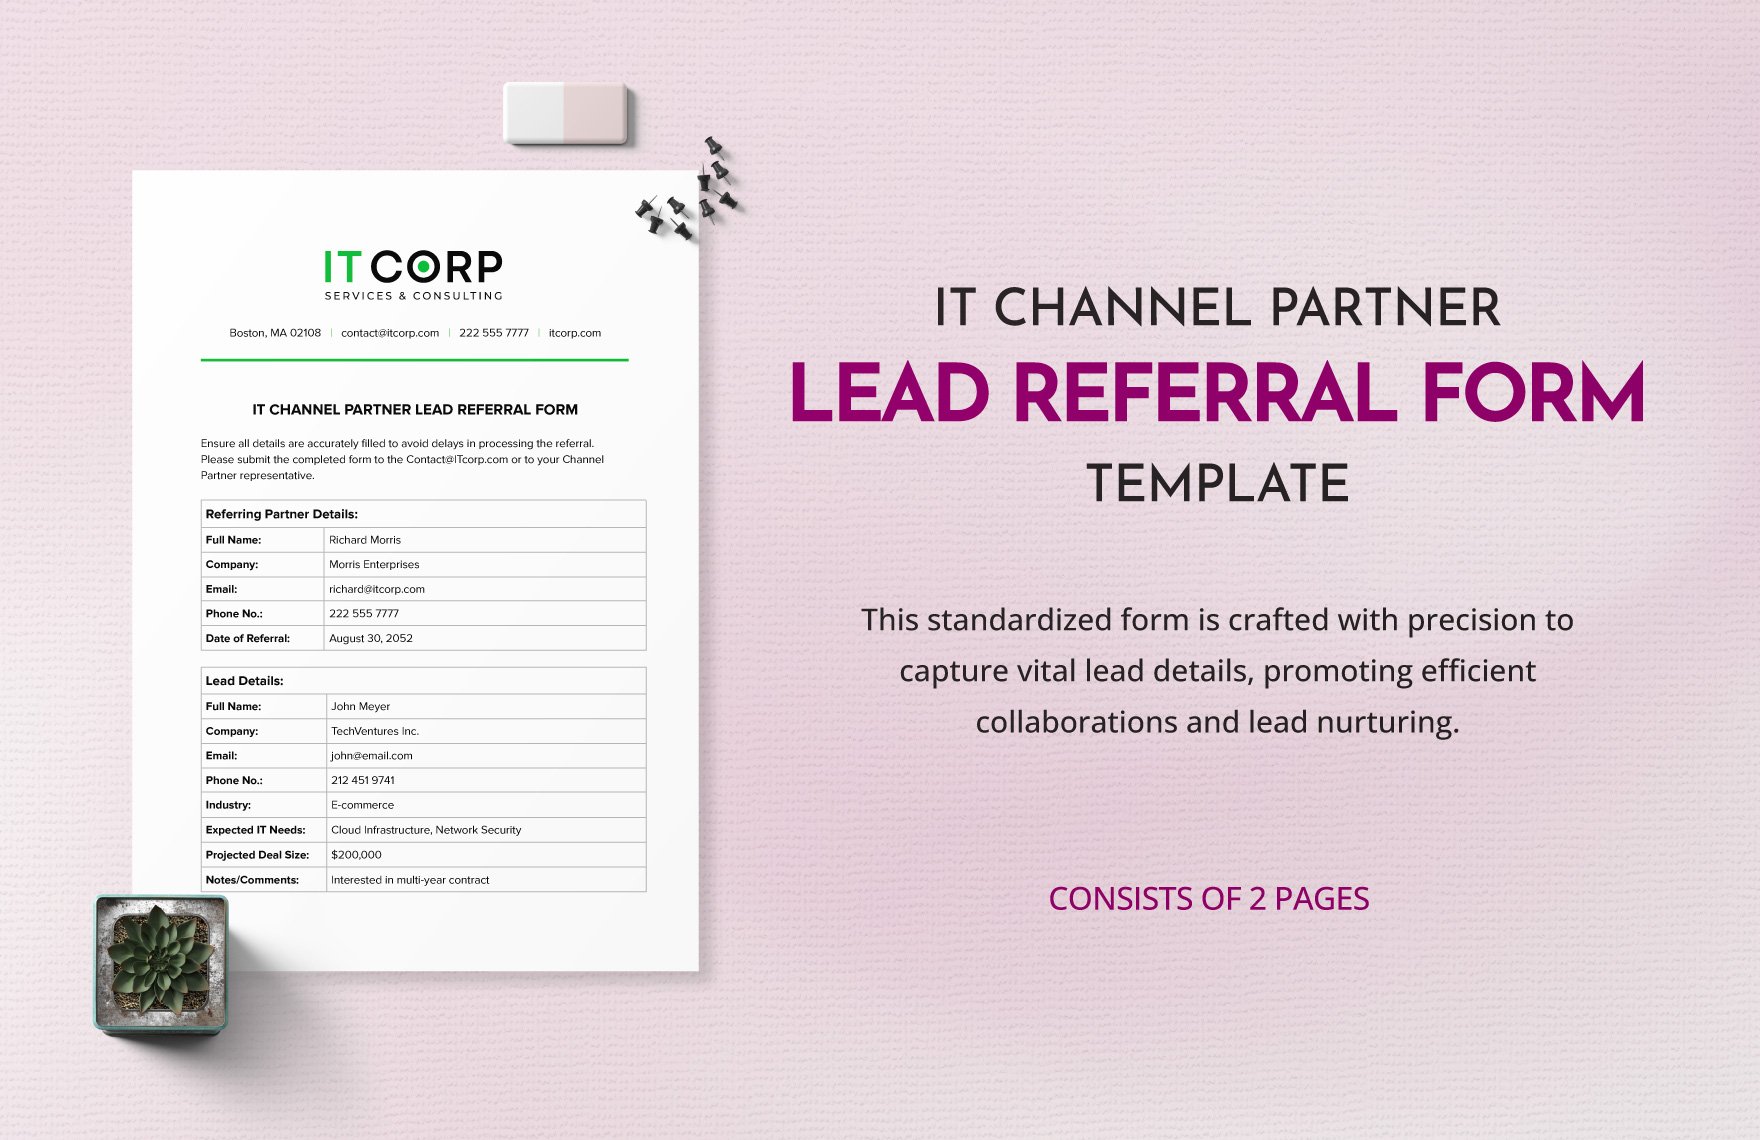 IT Channel Partner Lead Referral Form Template